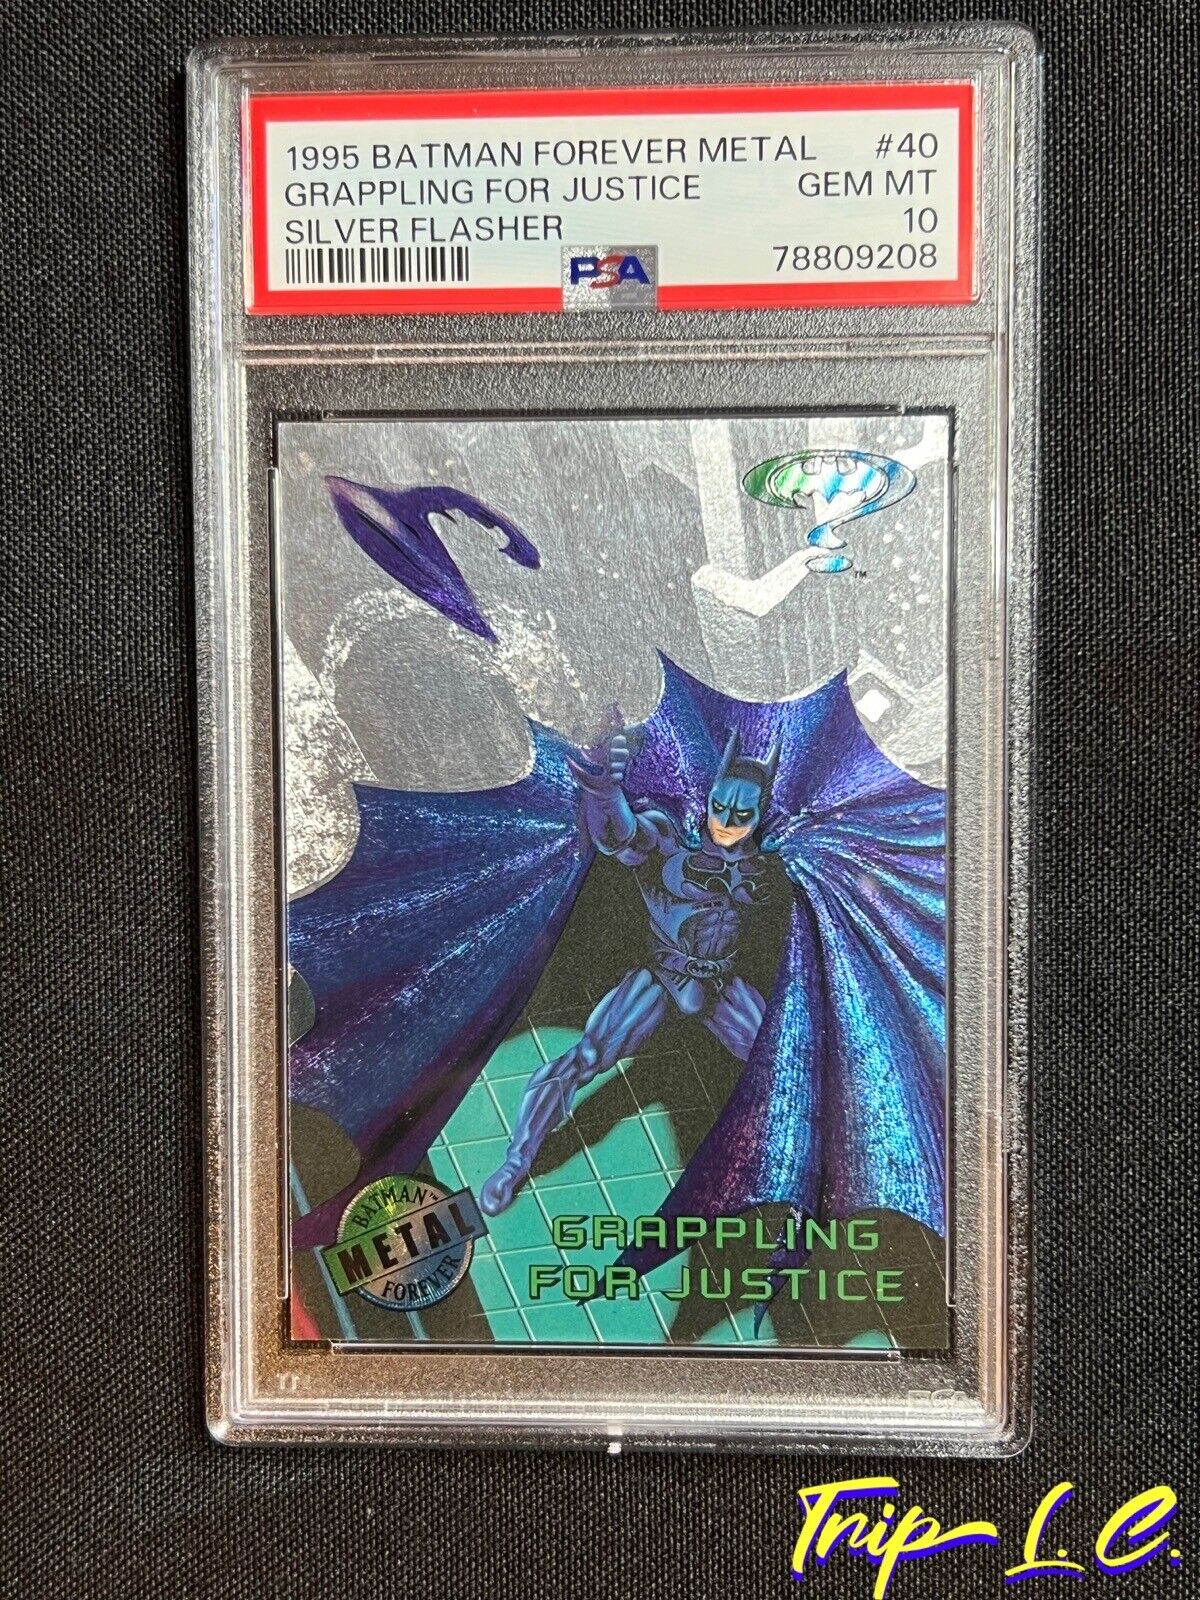 1995 Batman Forever Metal Silver Flasher #40 Grappling For Justice PSA 10